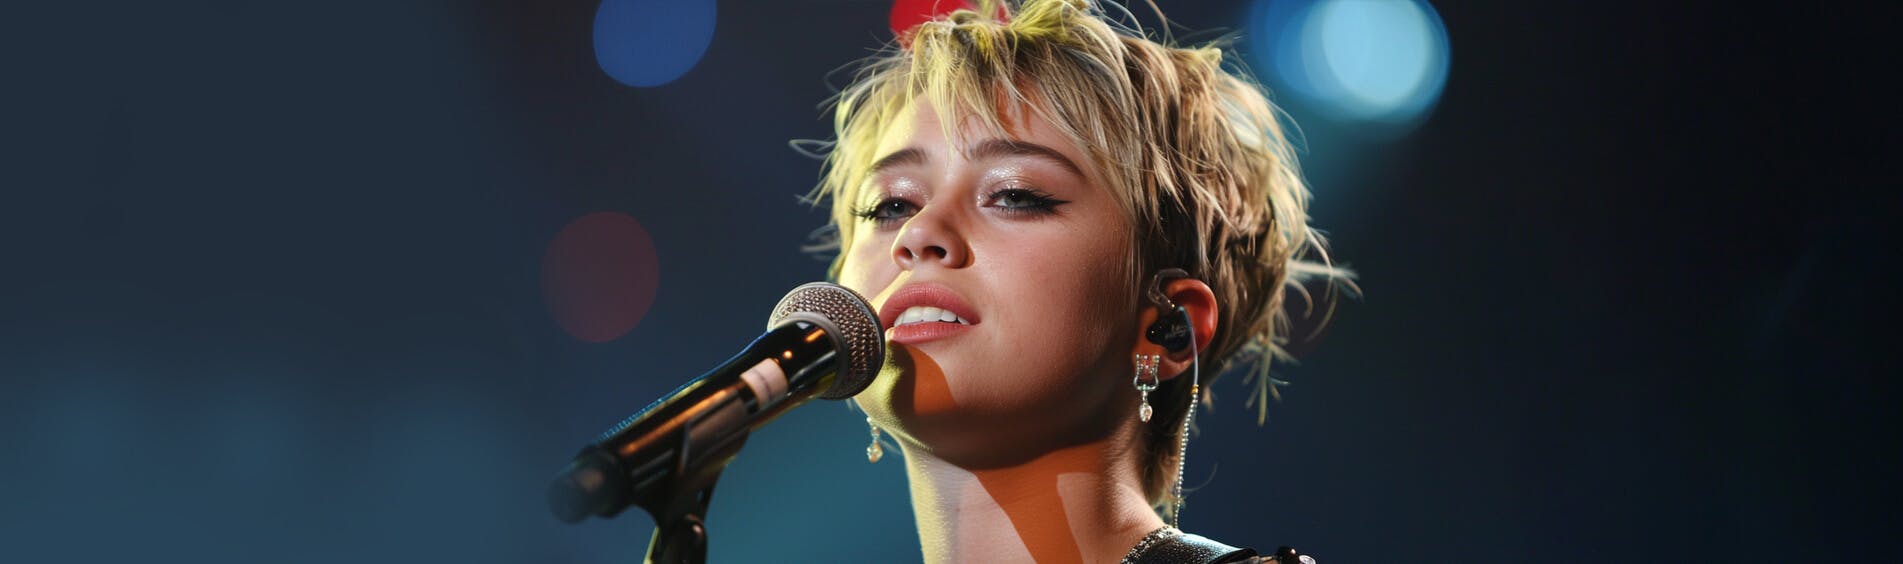 Cover Image for Miley Cyrus Appearing At The Next Season Of “My Nex Guest Needs No Introduction With David Letterman”